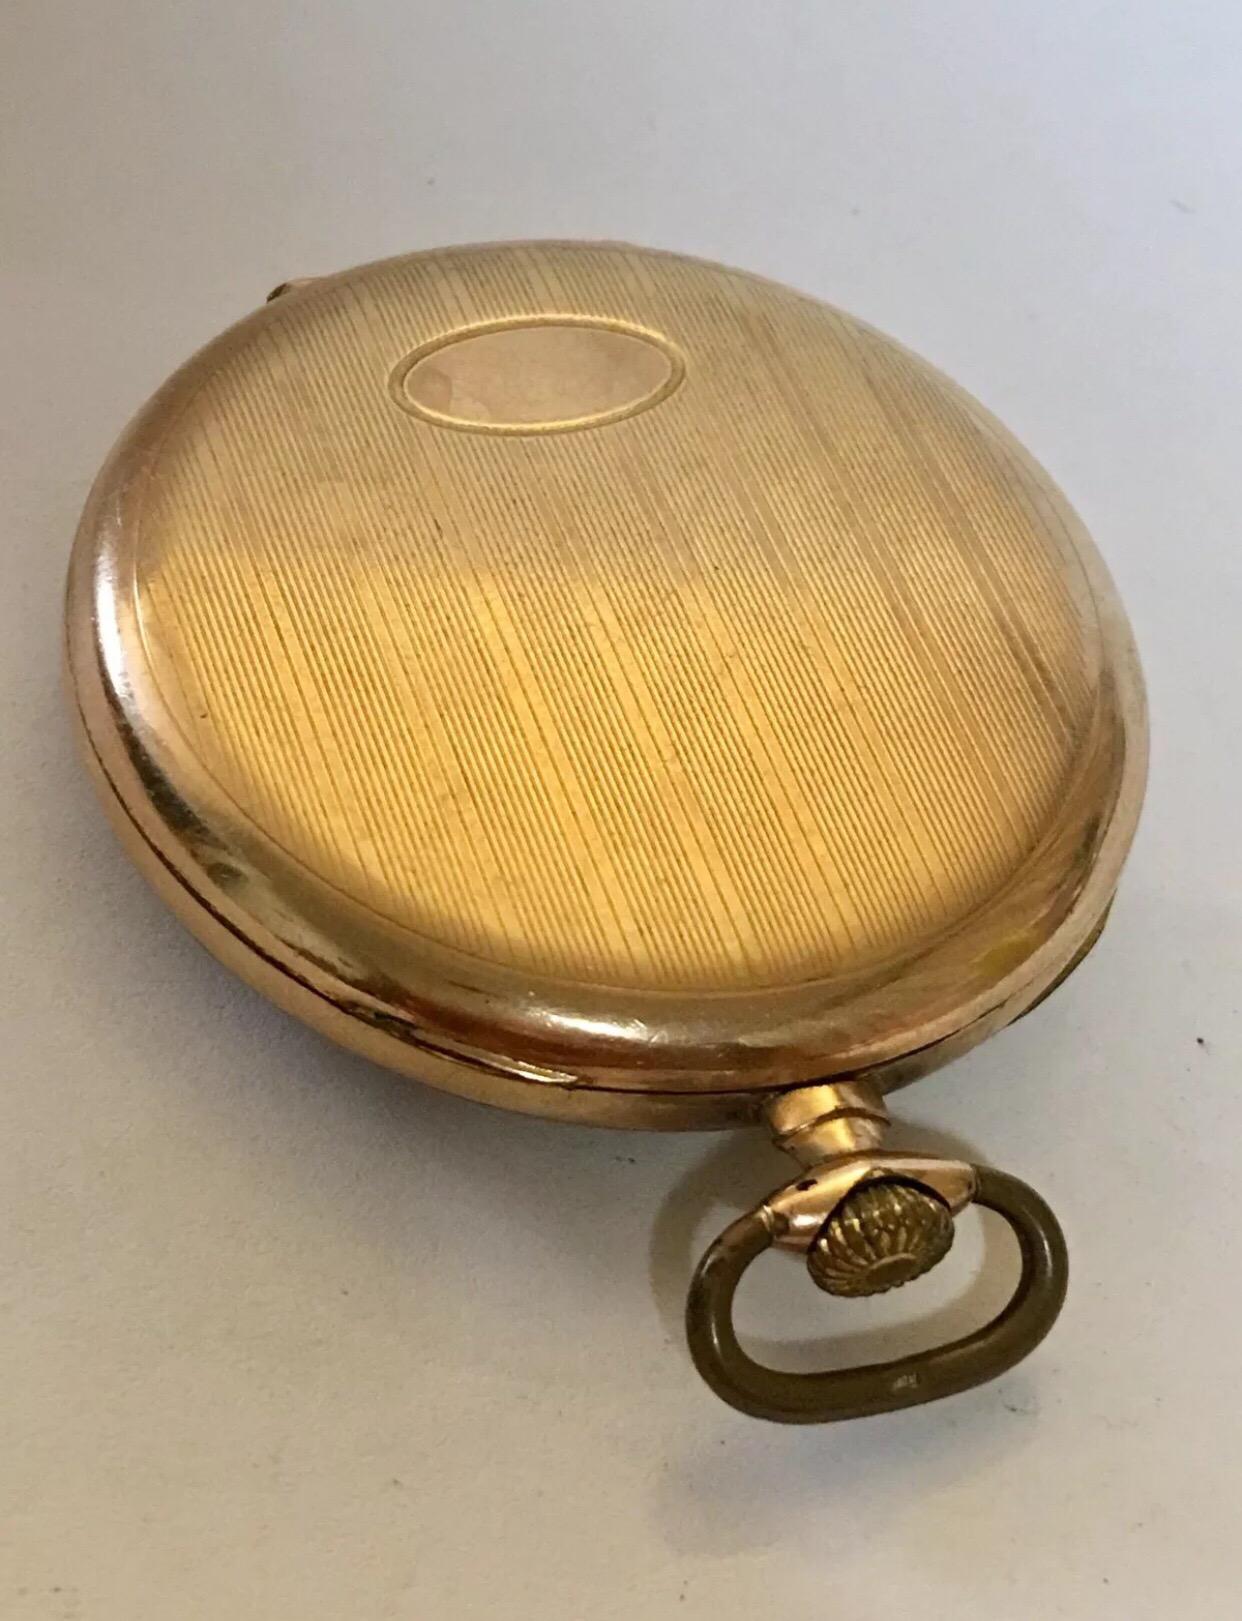 Stunning Gold-Plated Cyma Dress Pocket Watch In Good Condition For Sale In Carlisle, GB